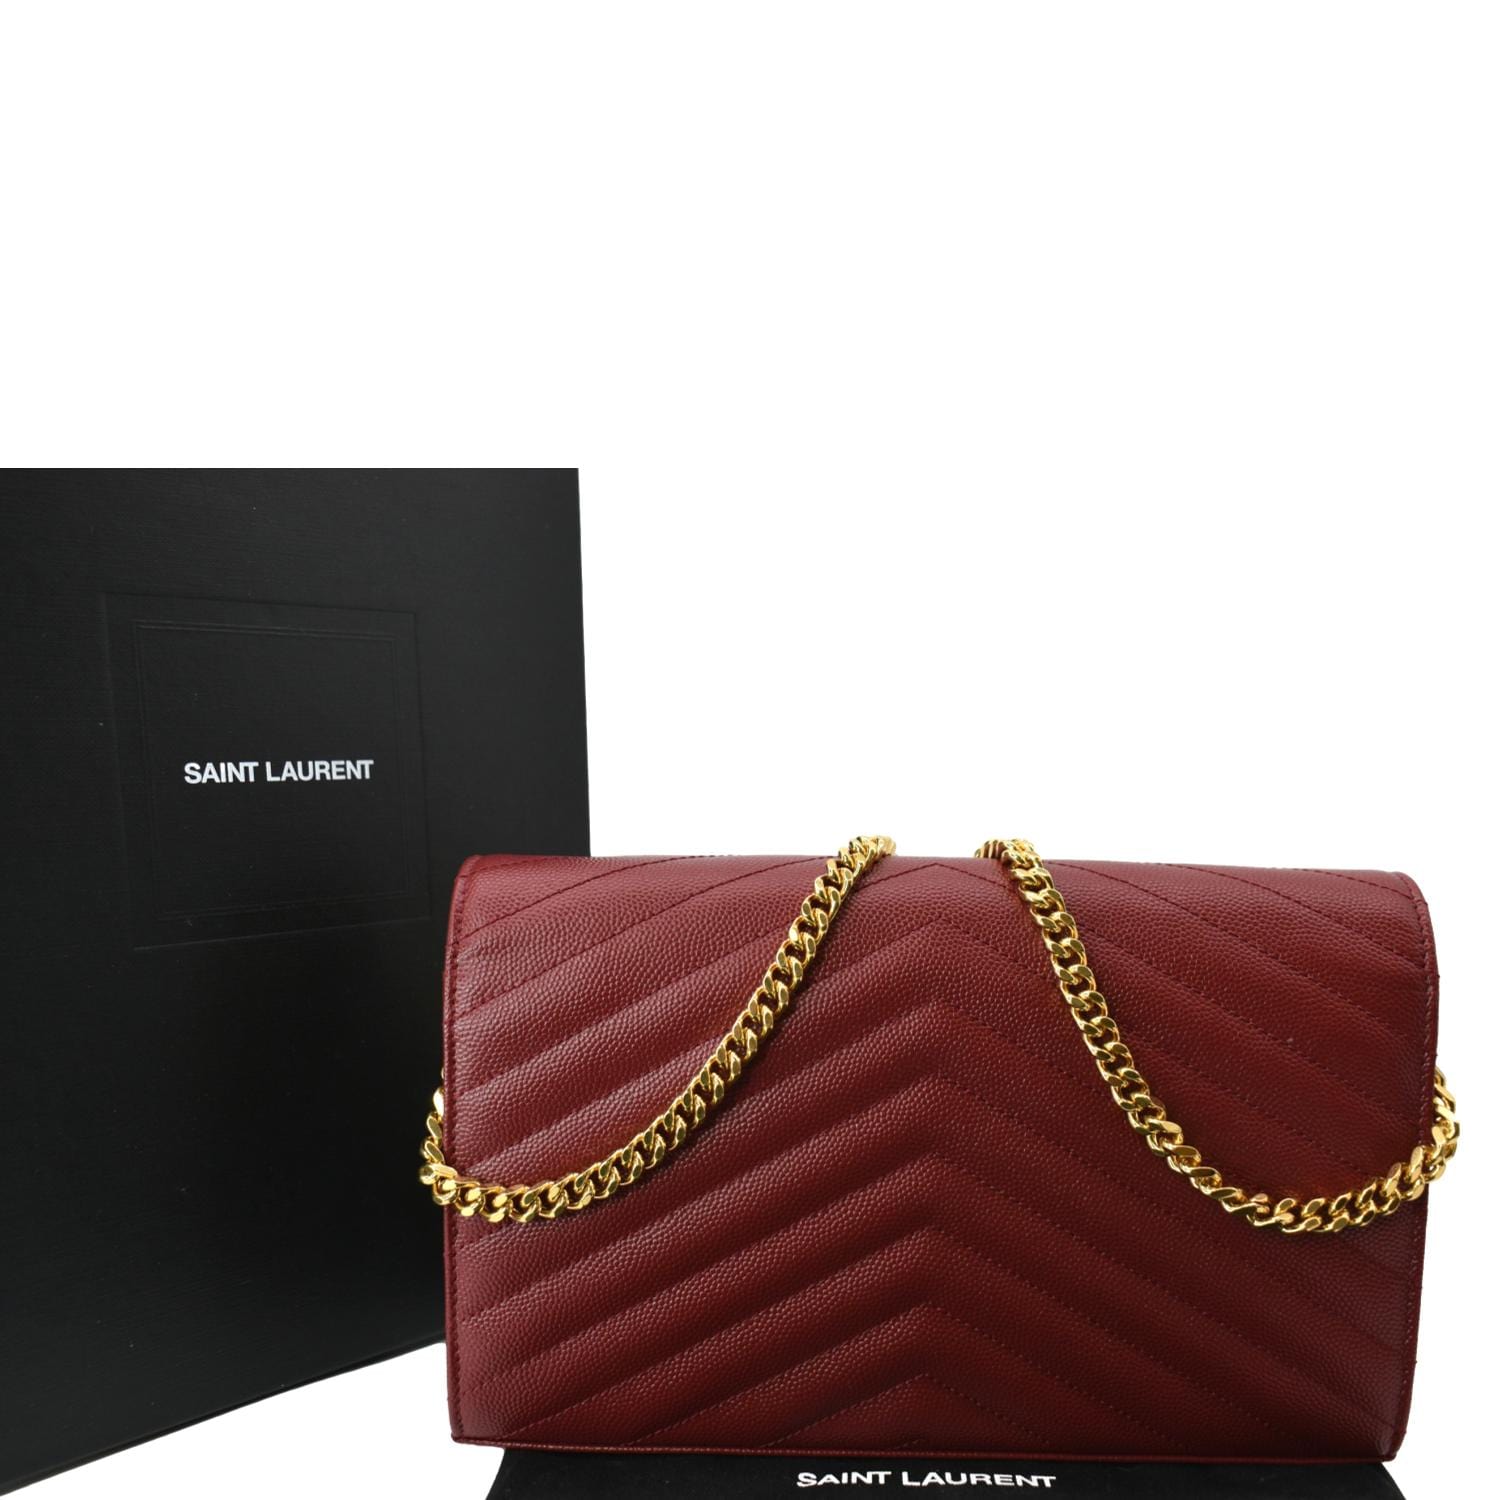 Learn how to Authenticate Your Ysl woc large. 